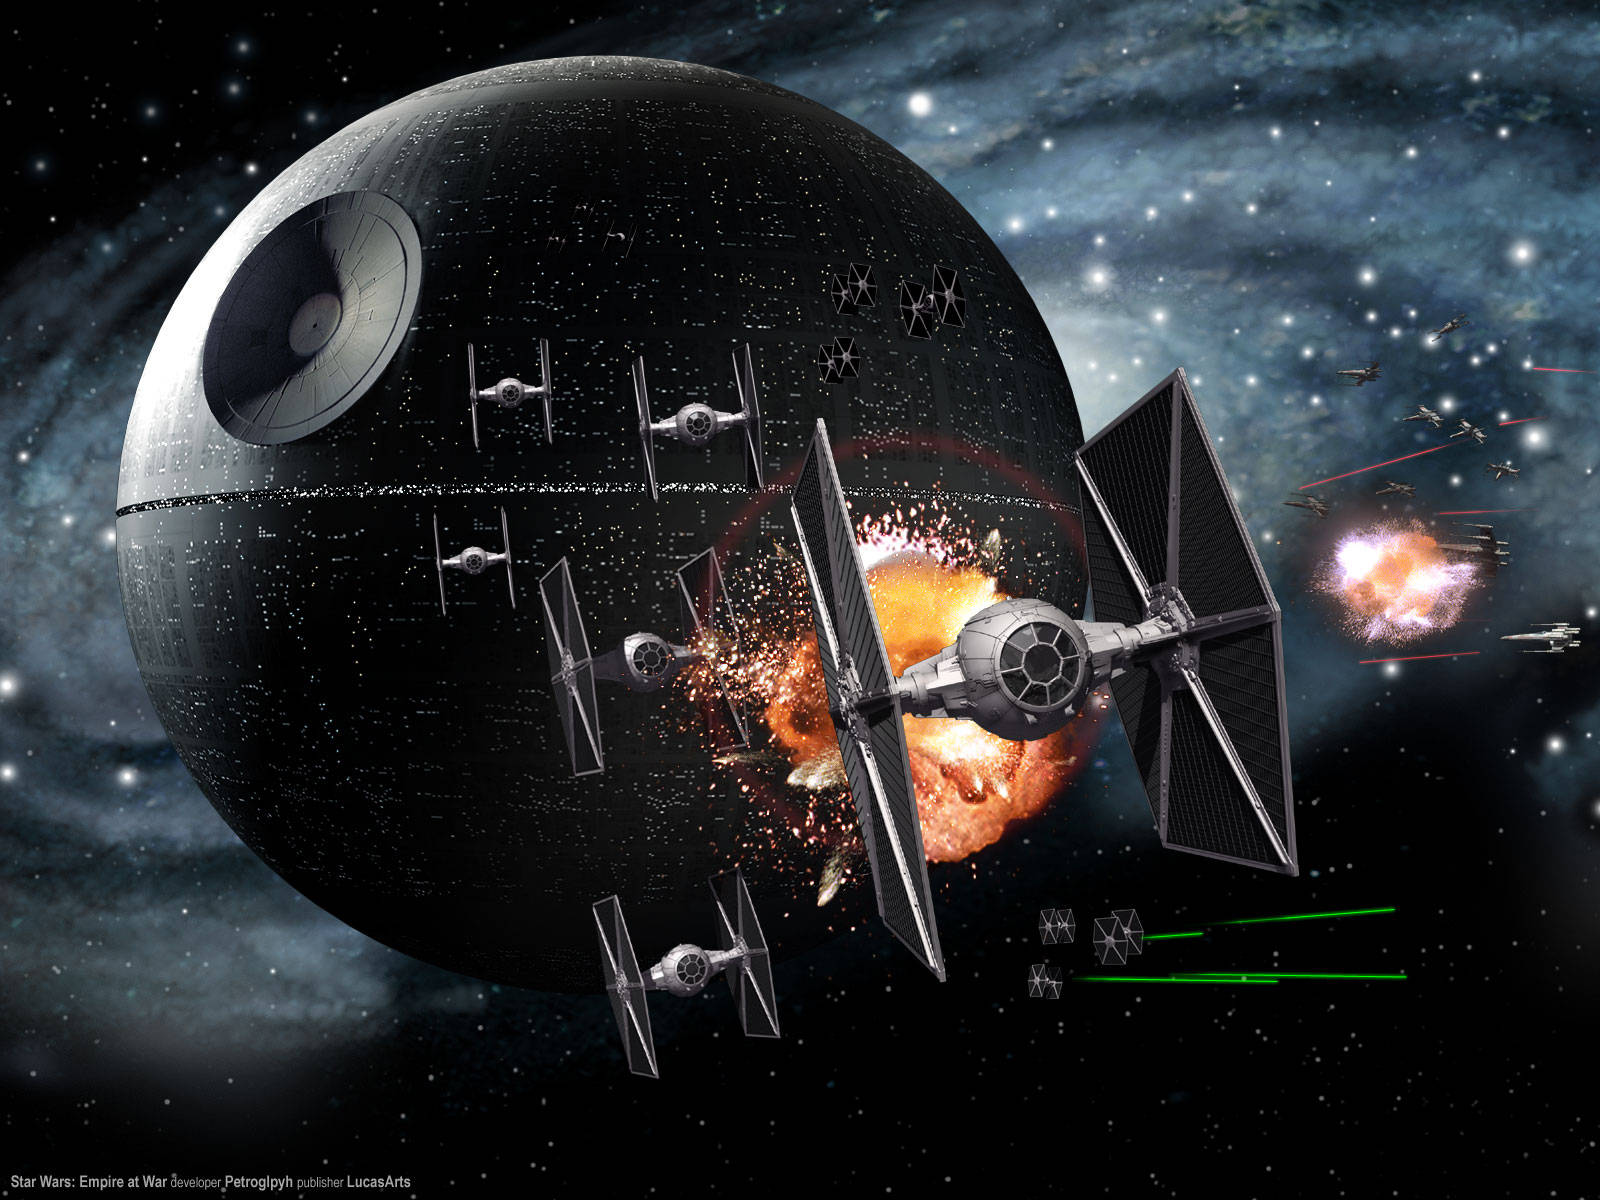 Death Star And Tie Fighters From Star Wars Landscape Wallpaper